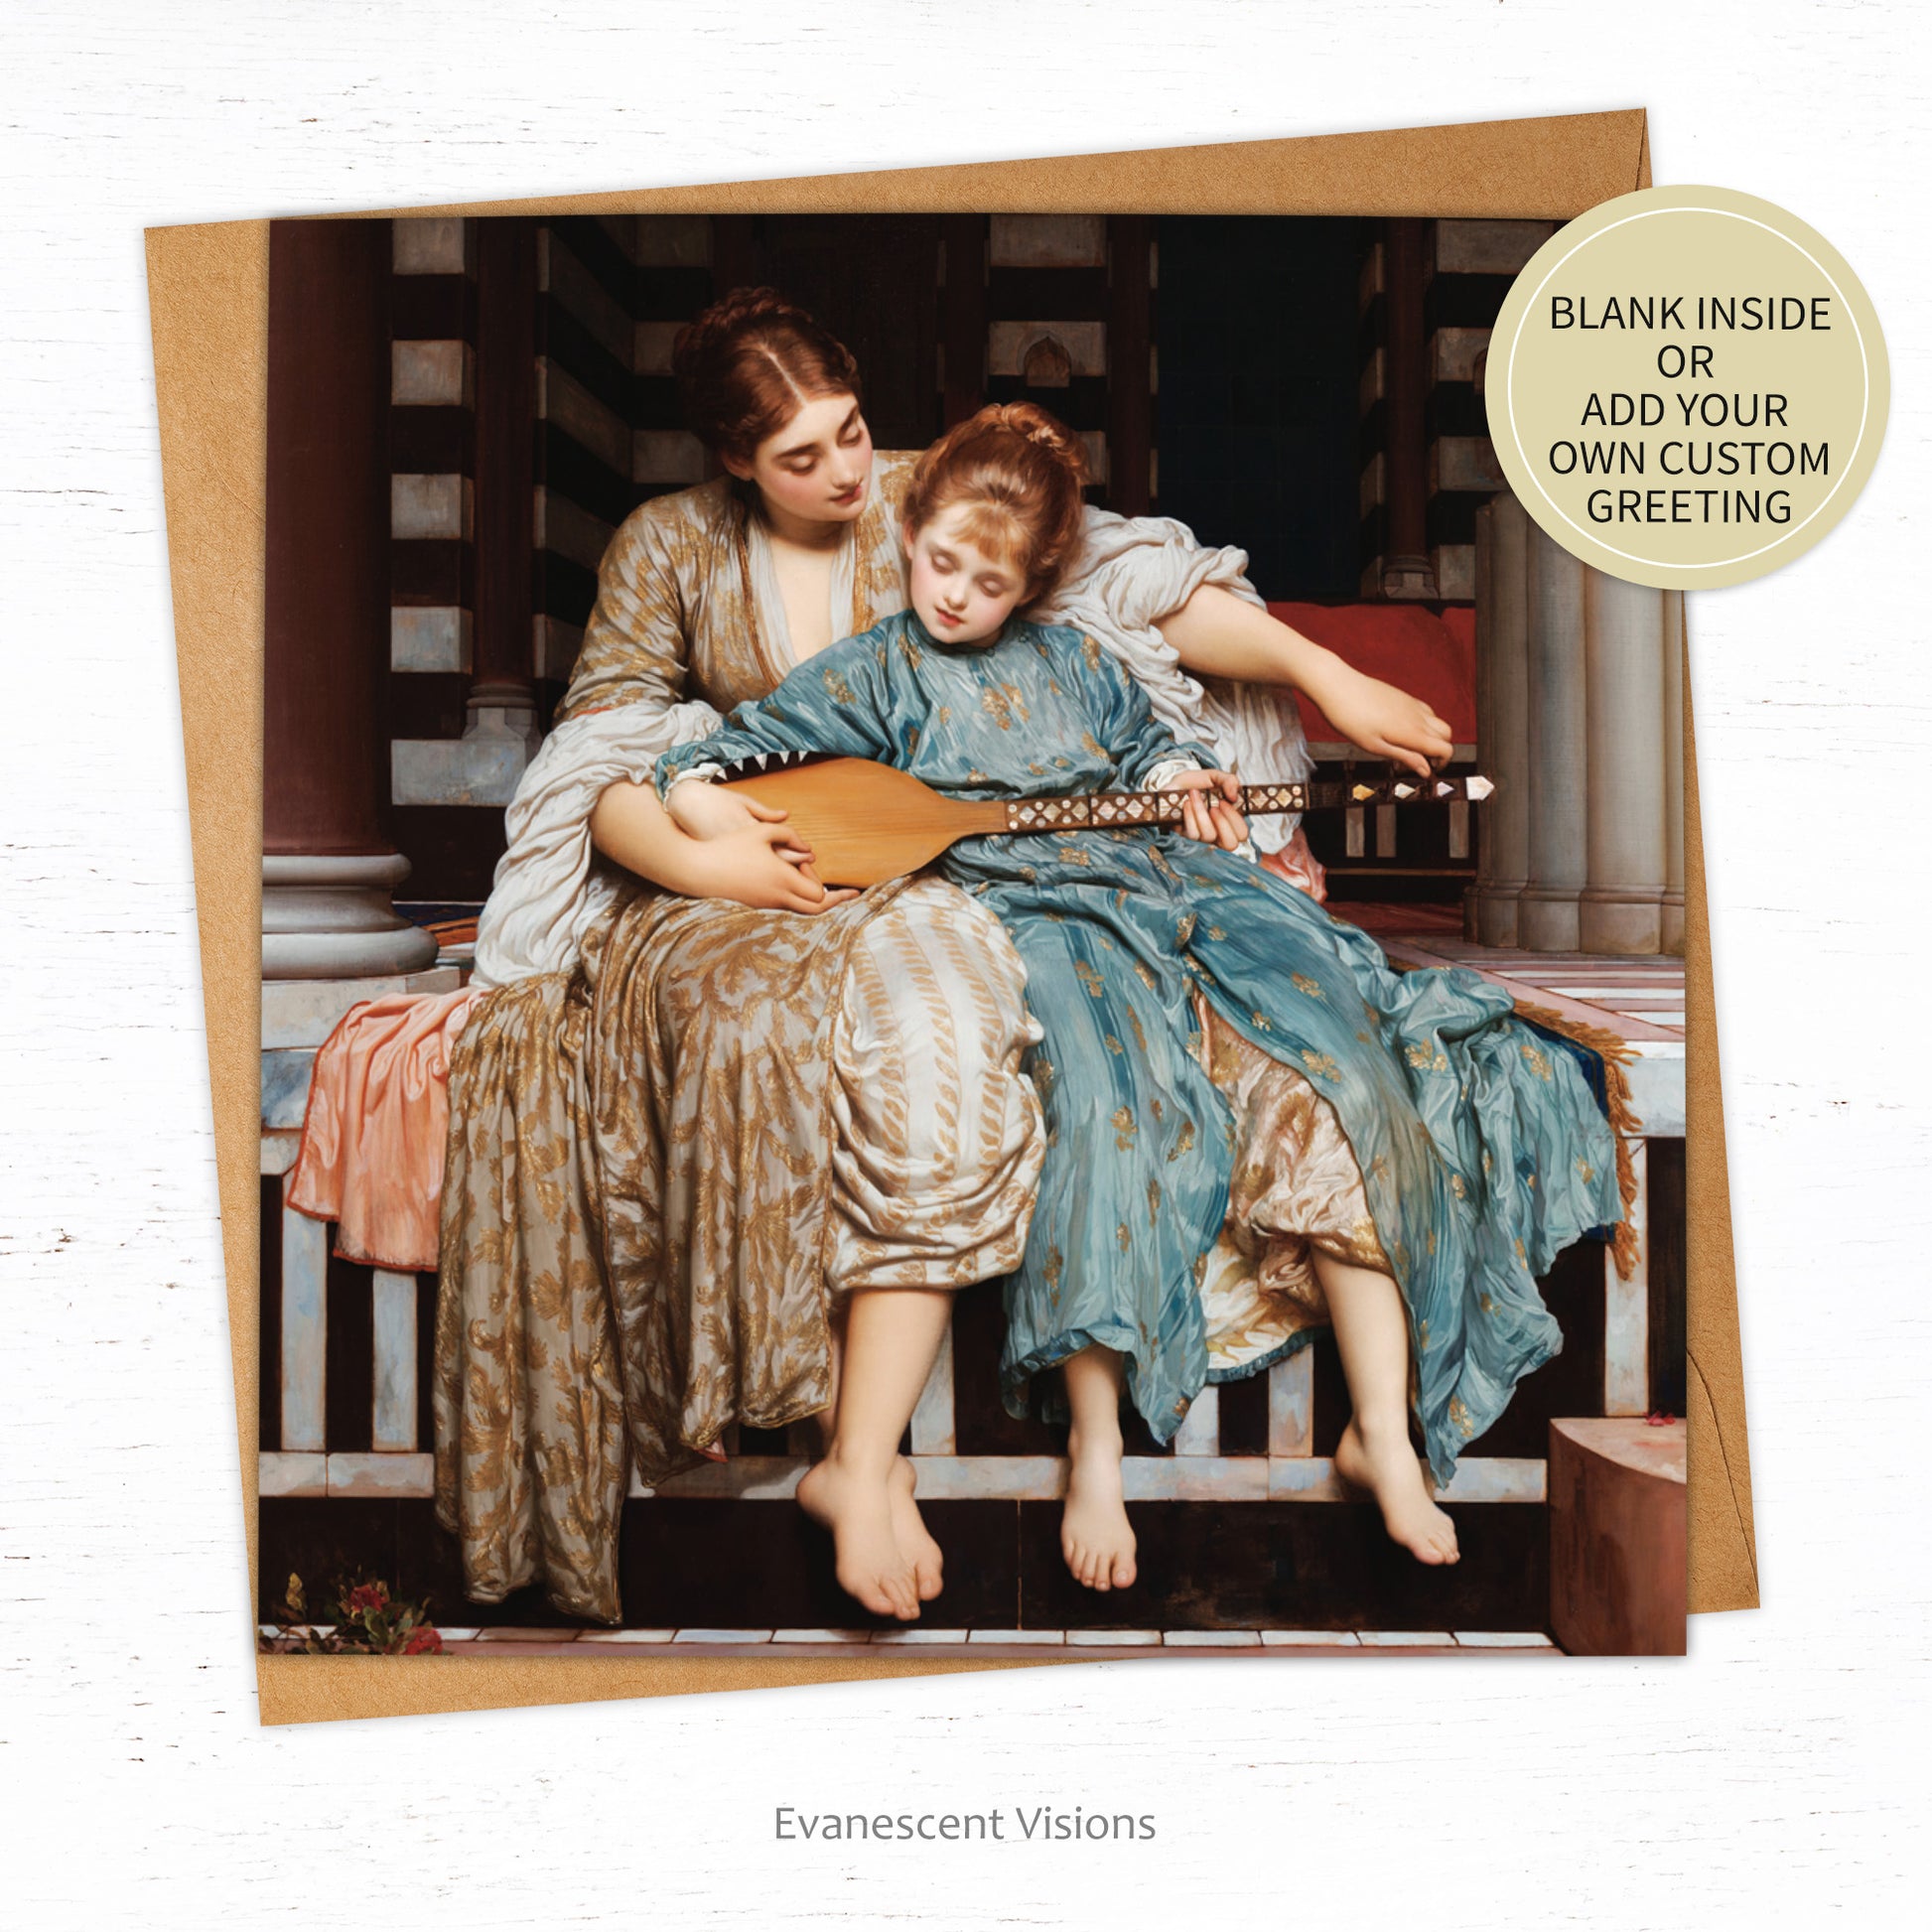 Card and envelope with image of Frederic Leighton's 'The Music Lesson', with sticker saying 'blank inside or add your own custom greeting'